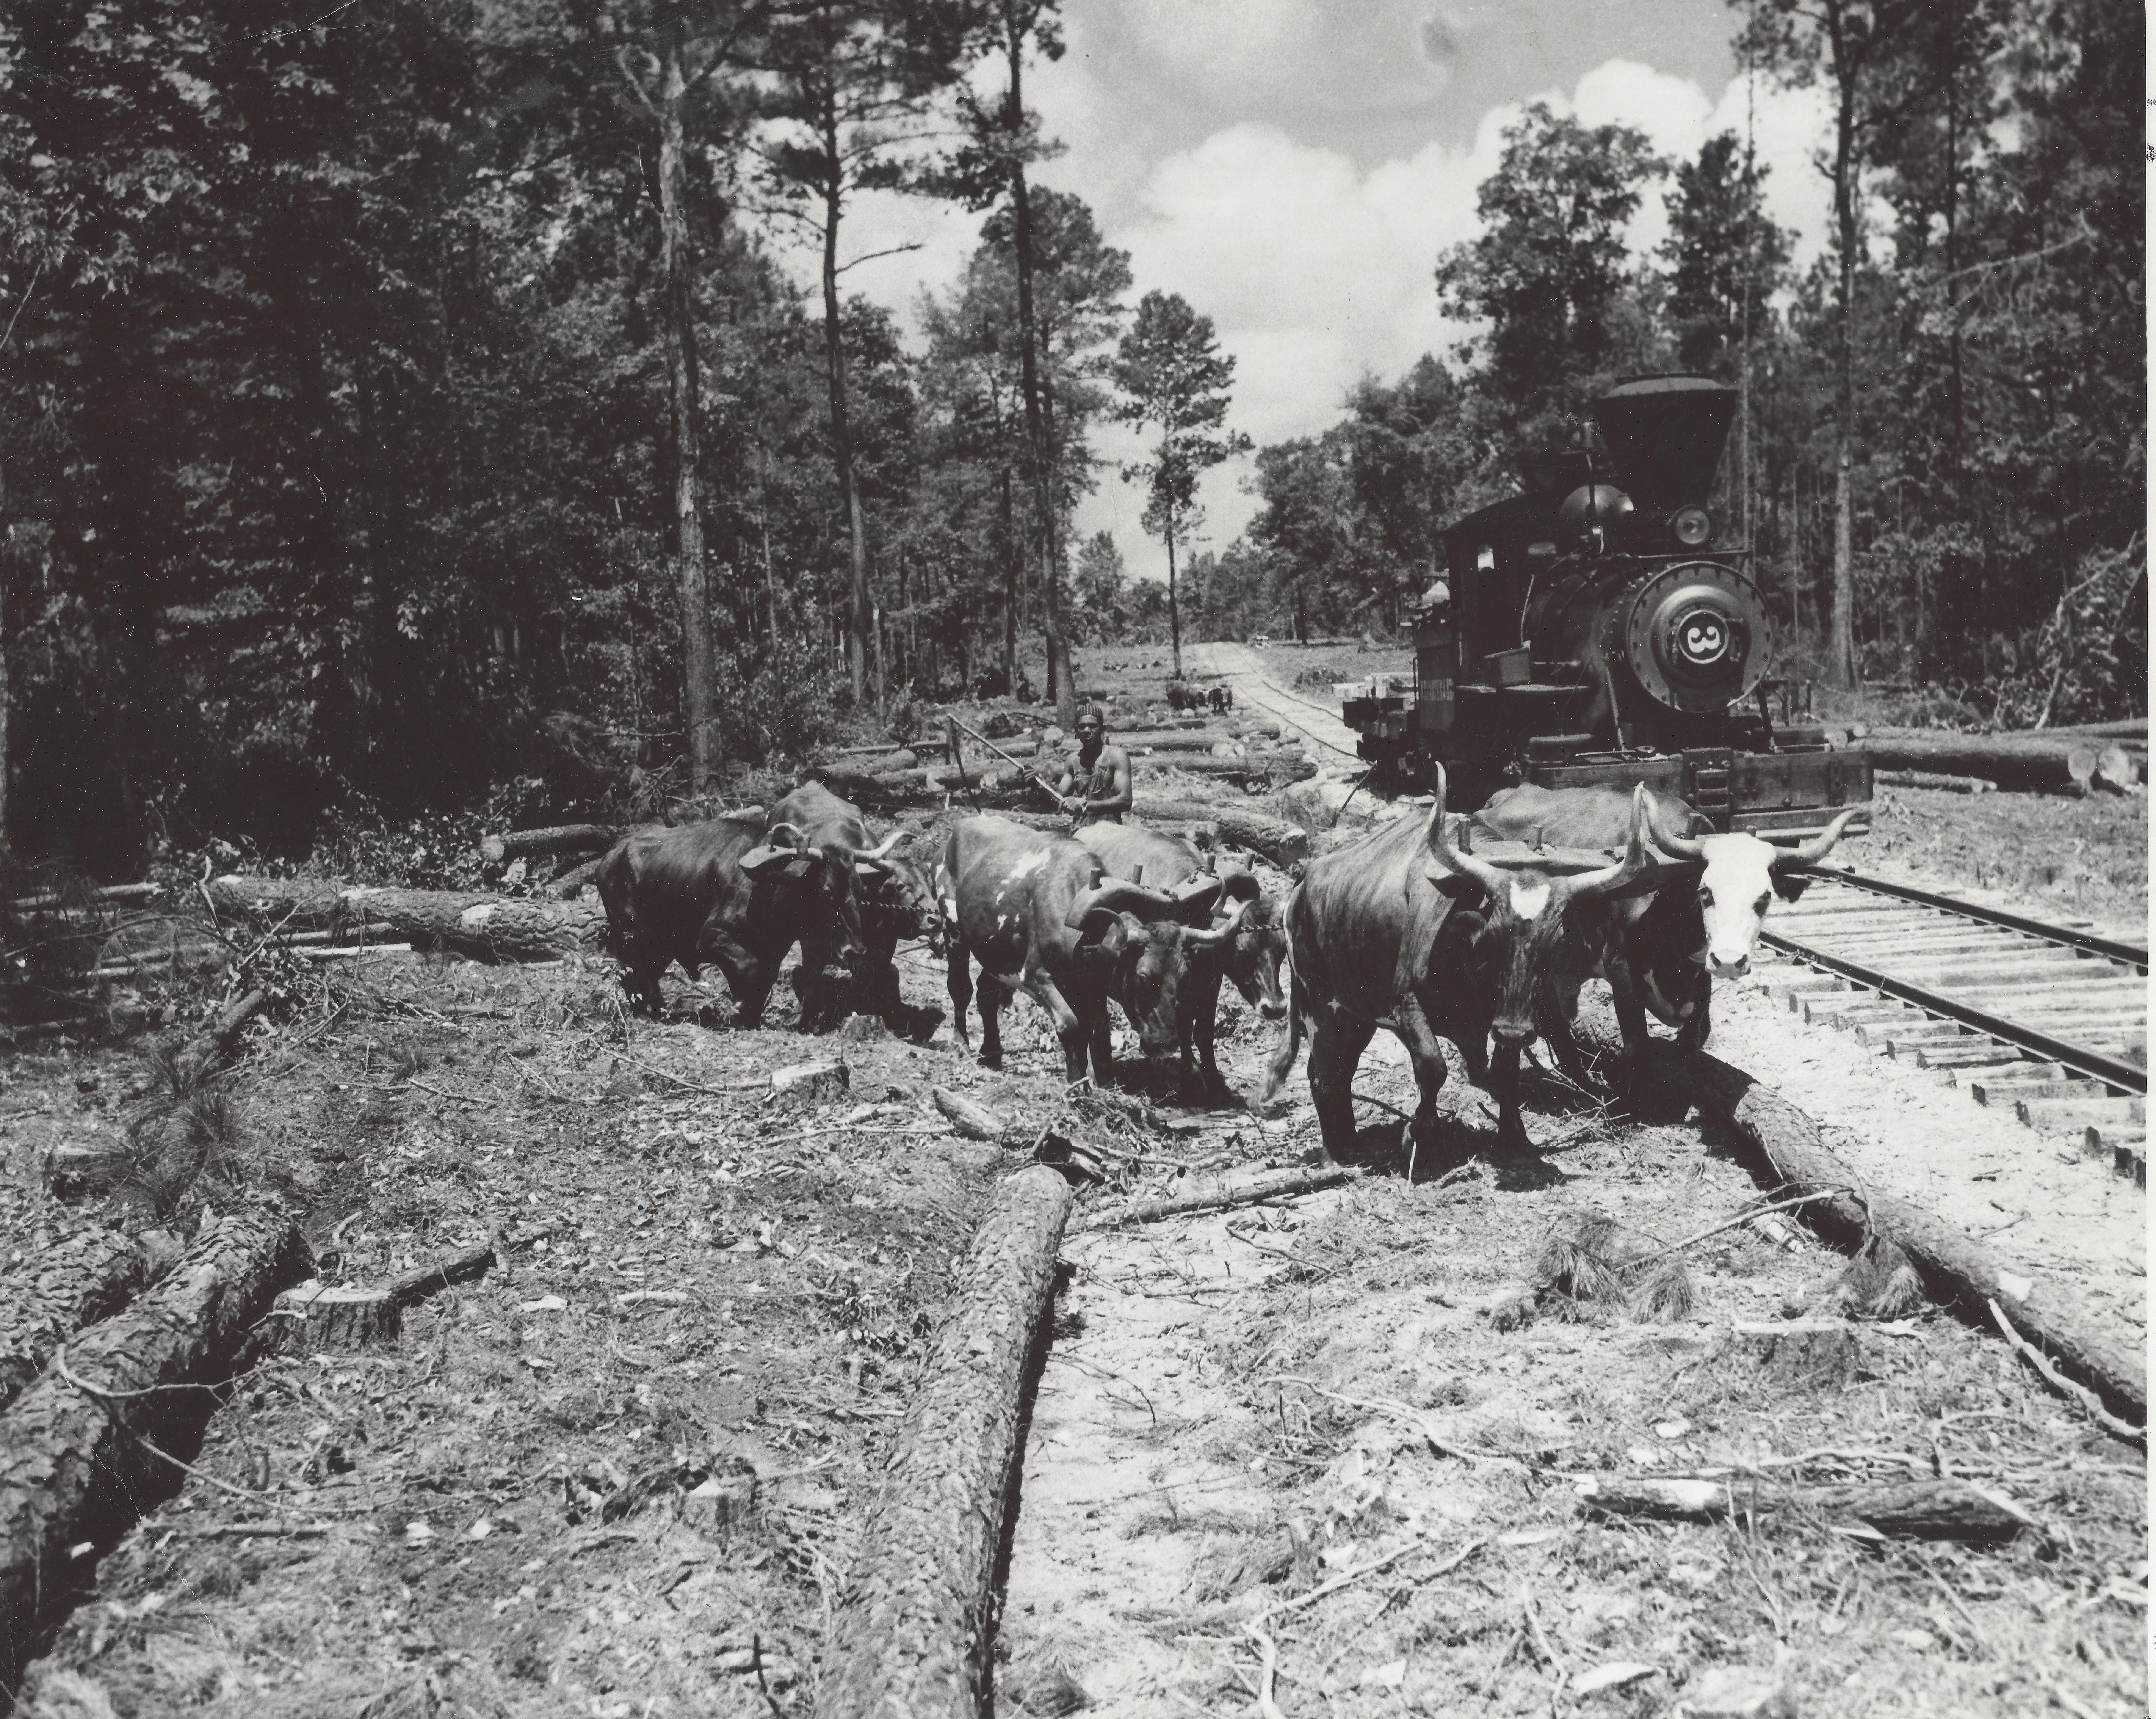 Railroad and oxen